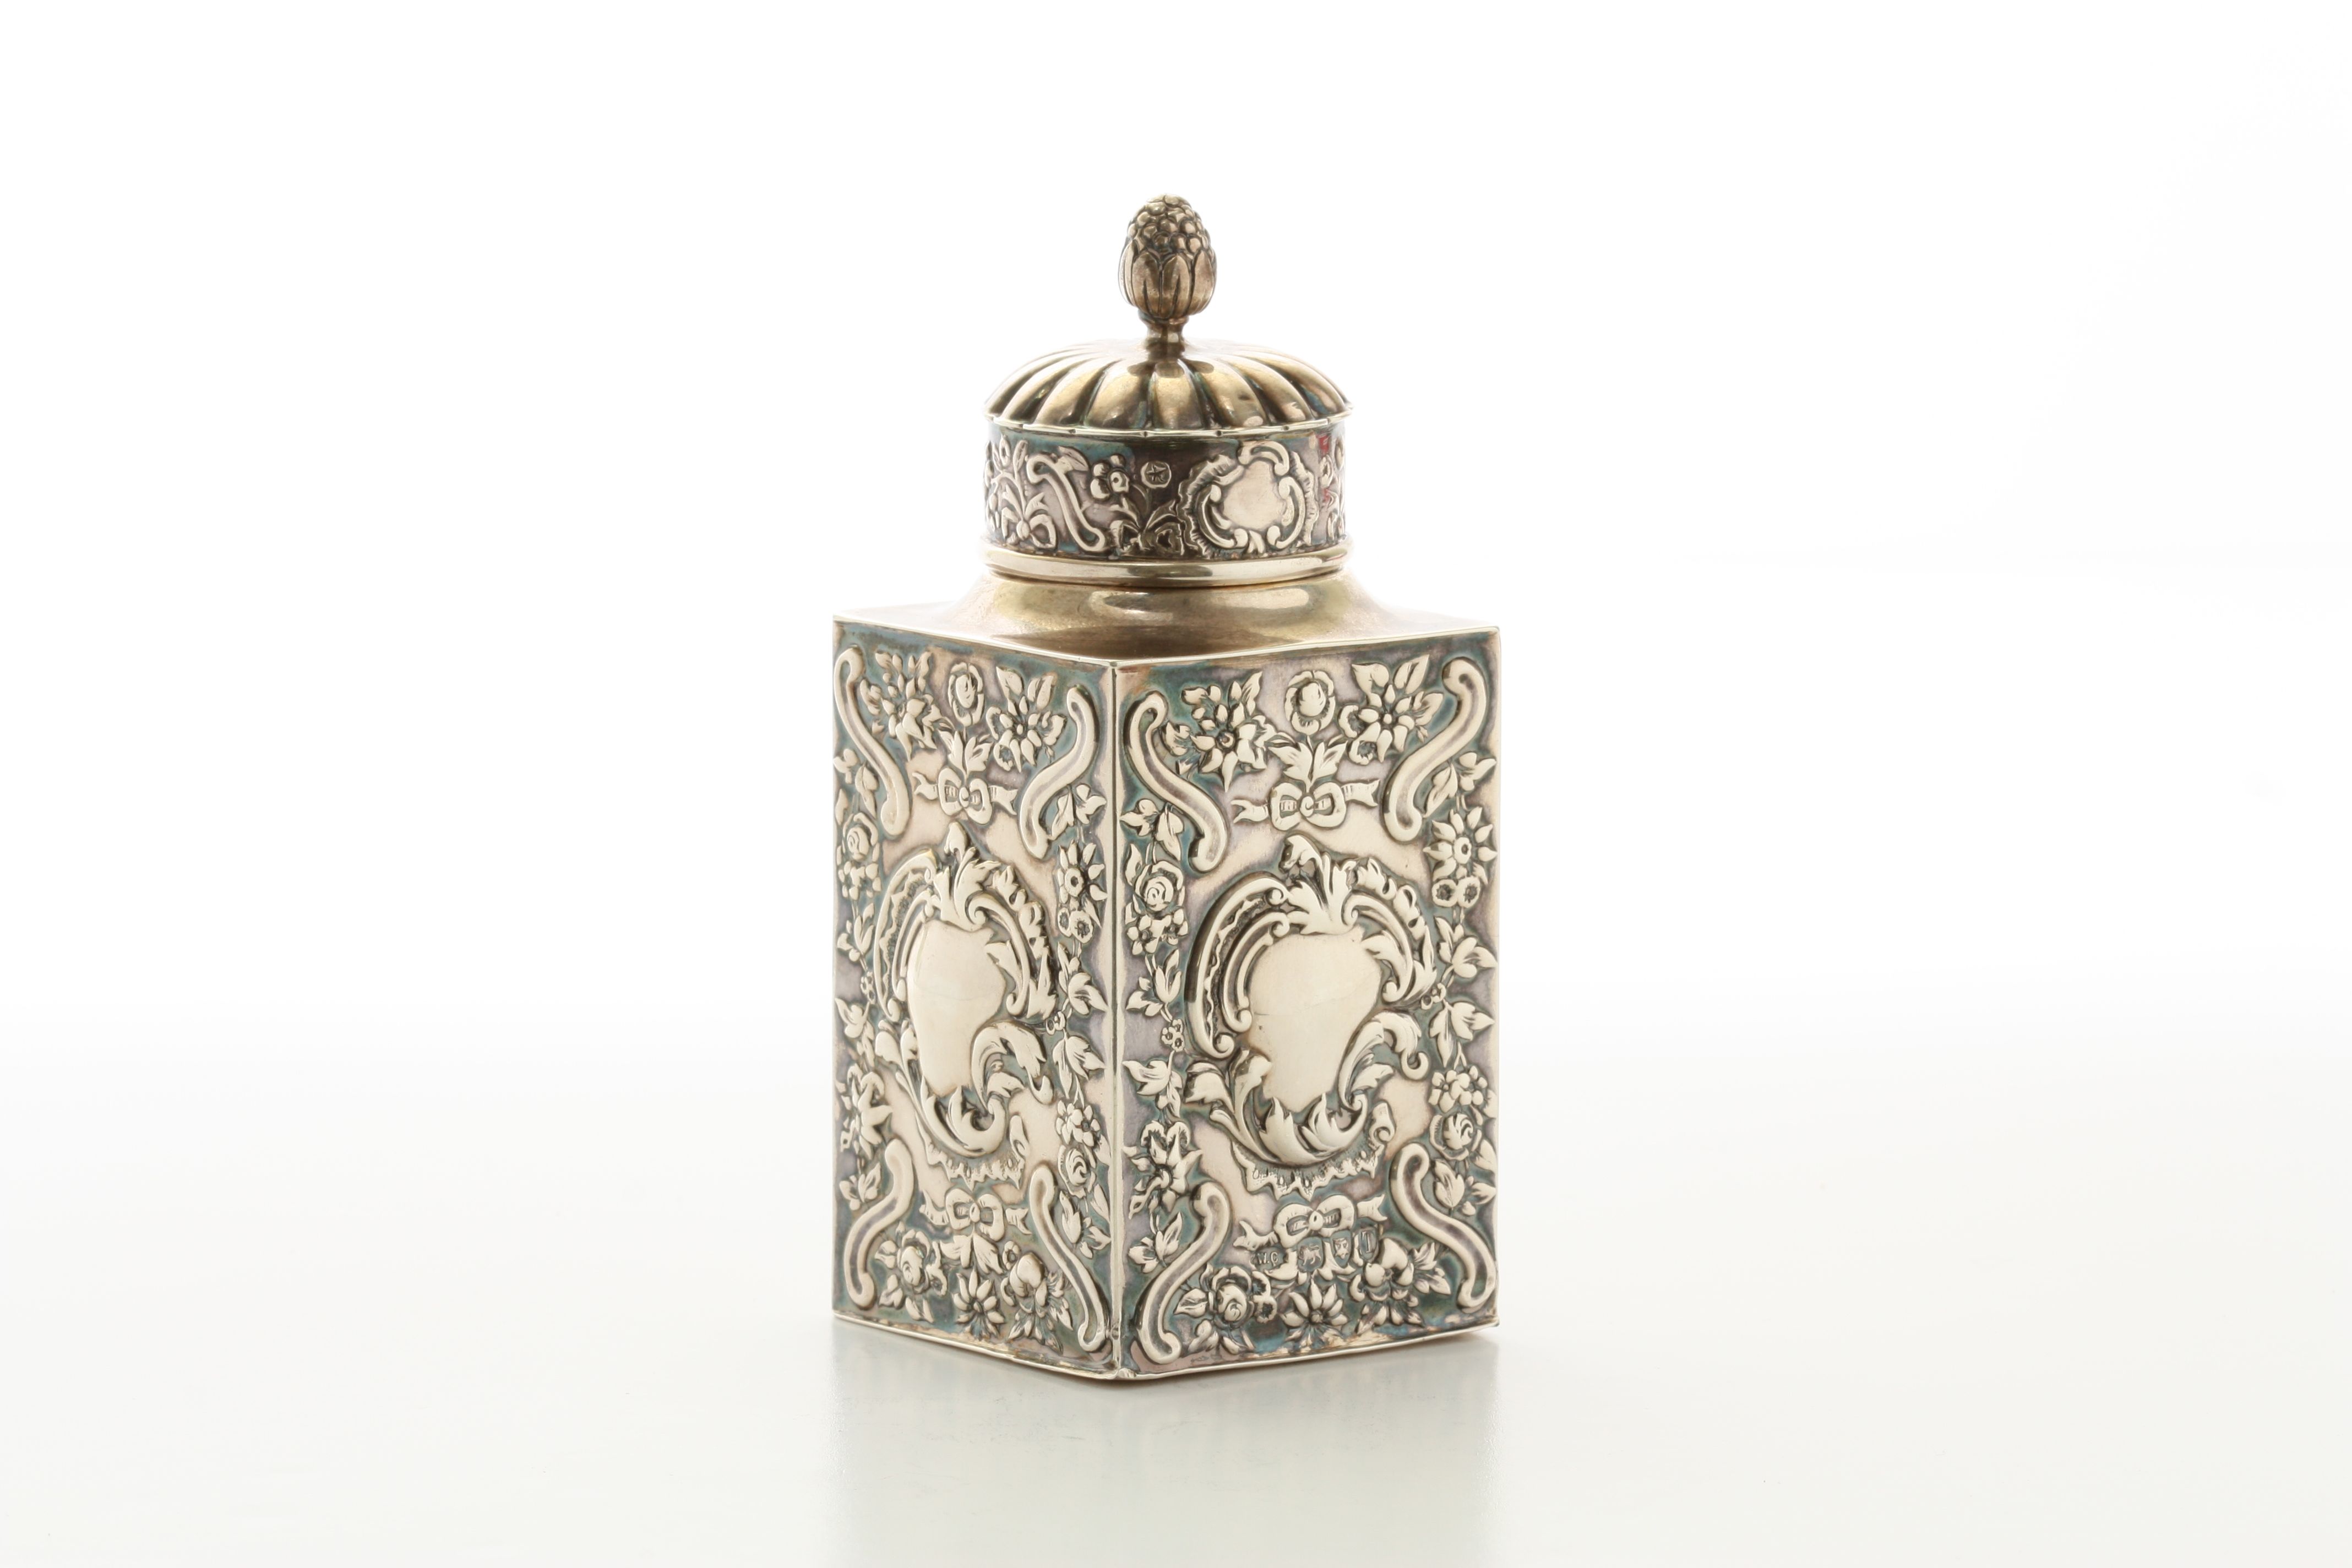 A Victorian repousse silver tea caddy by William Comyns hallmarked London 1894, the fluted lid